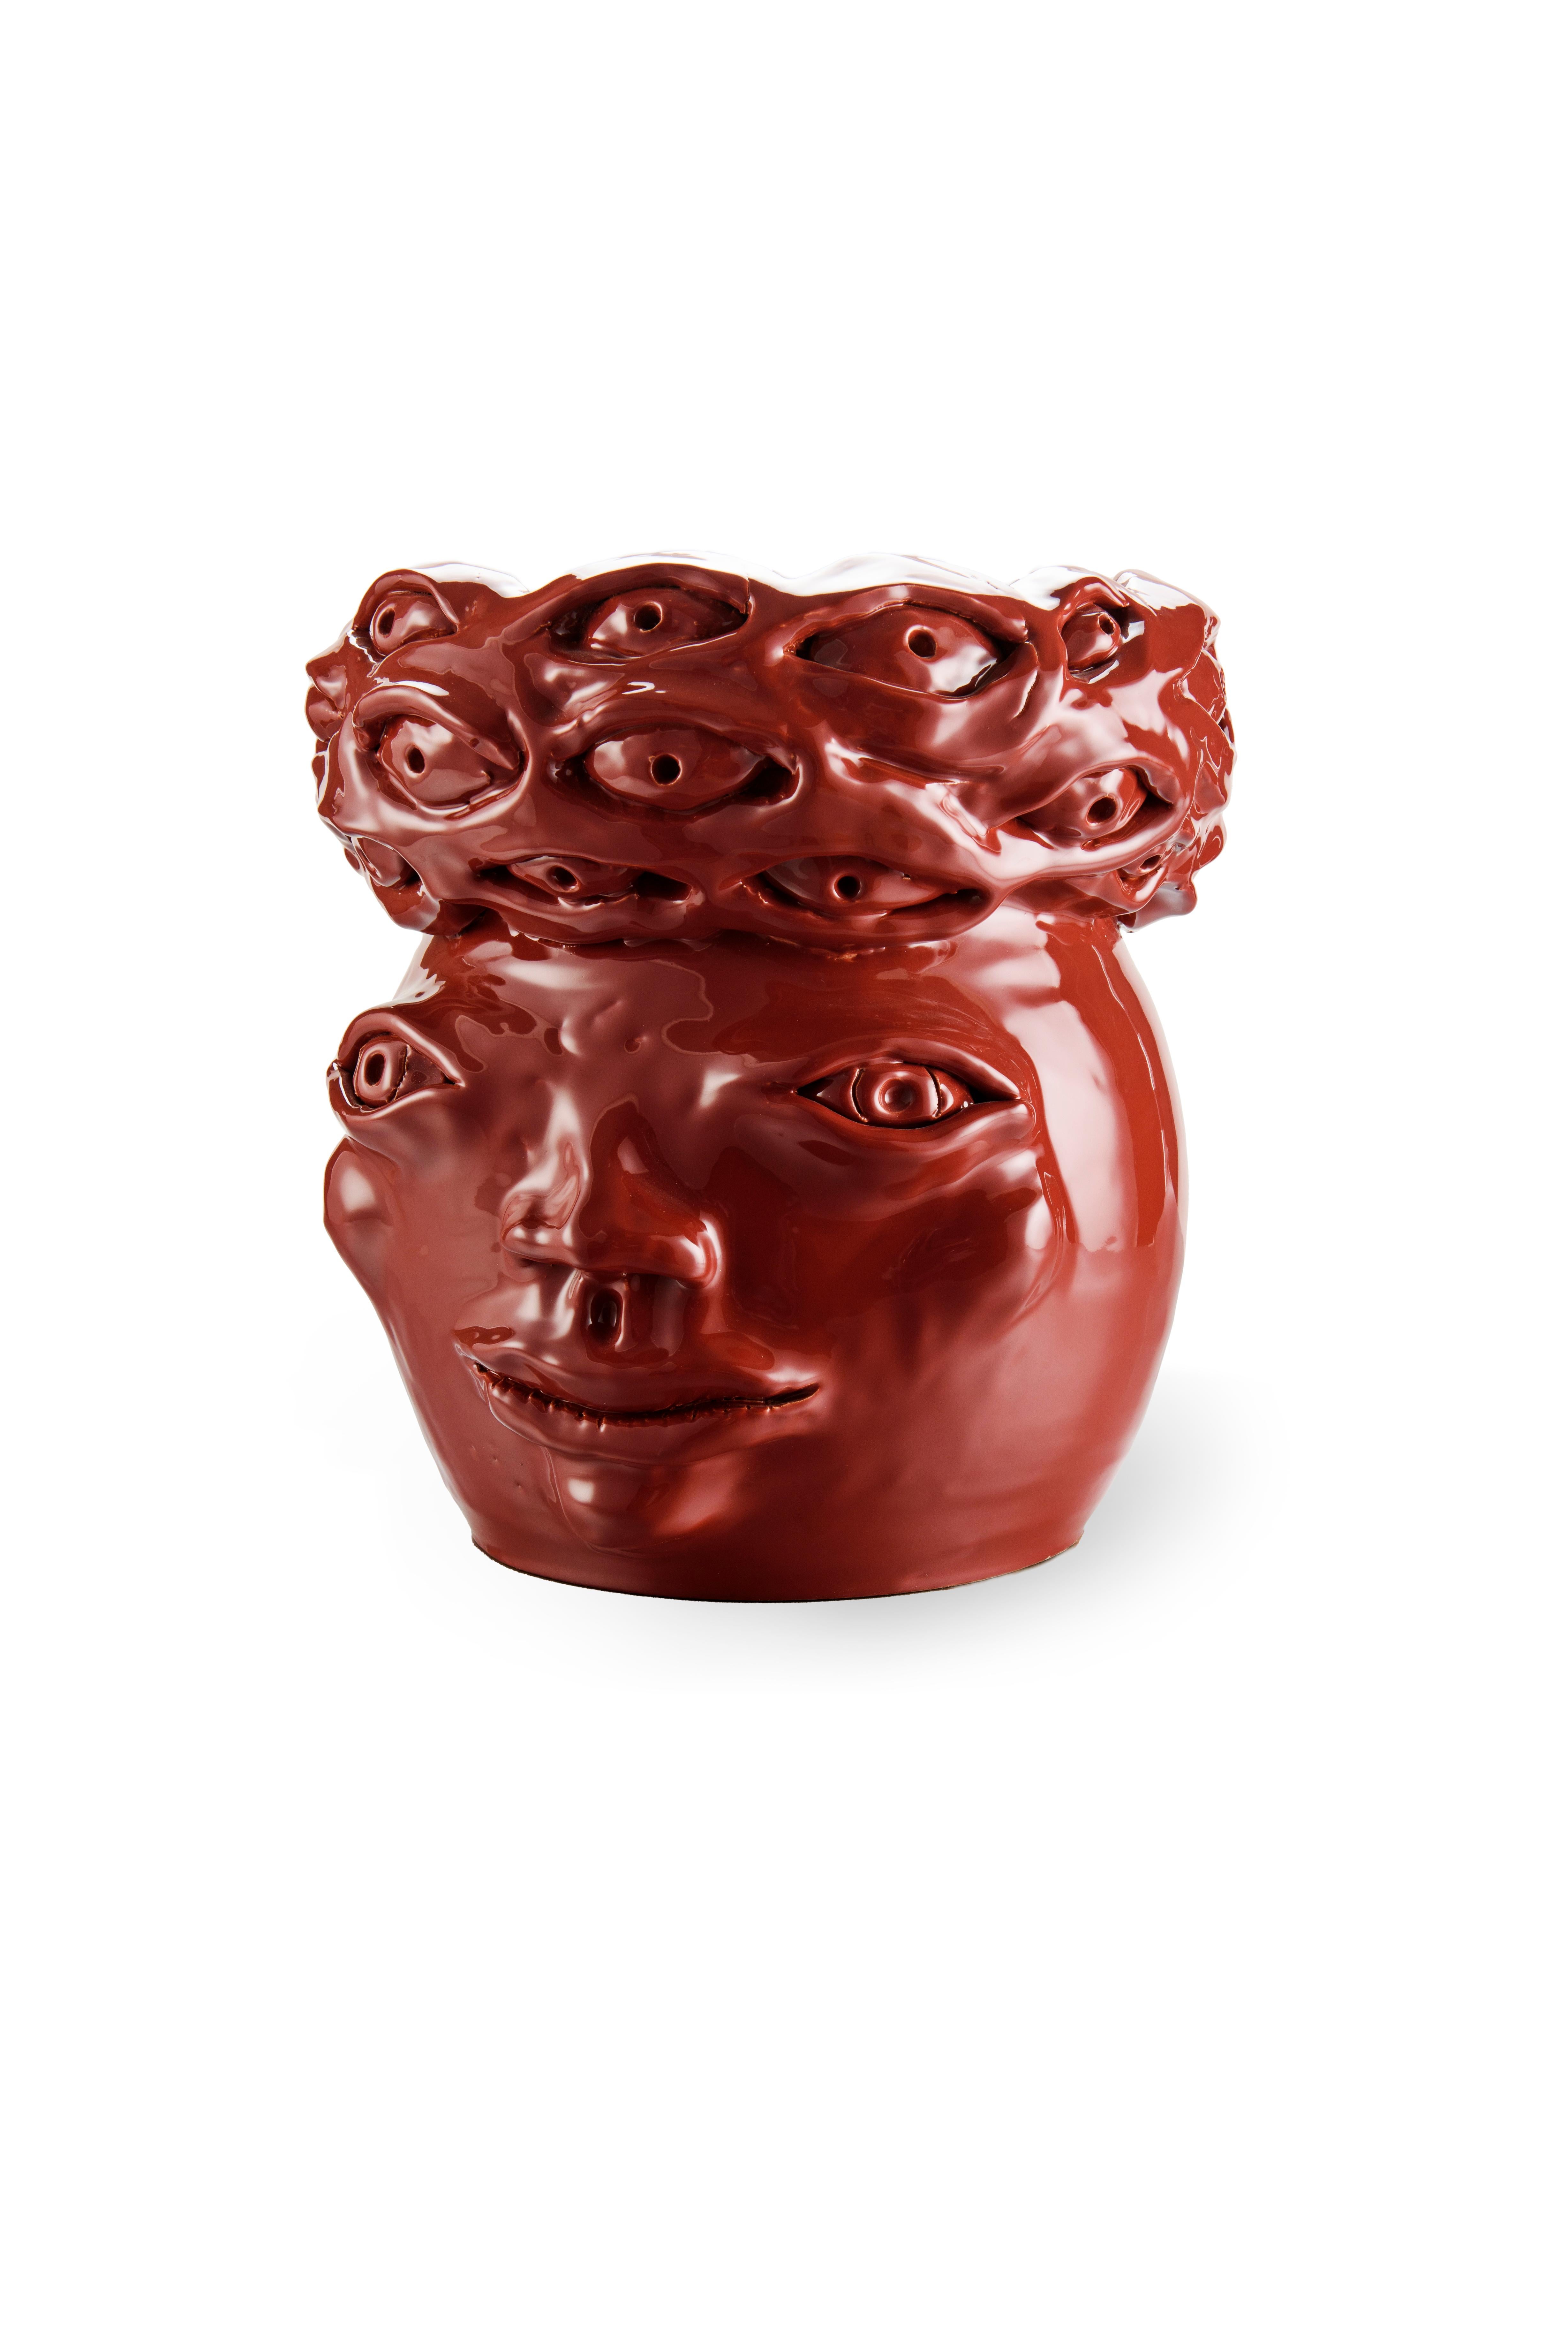 This Freaklab Eye Vase is made entirely by hand with the lathe and modeling technique.  Starting from the clay, the piece is dried and baked in the oven at 900 degrees .  The next step involves the decoration with glazes, colors, and crystalline for